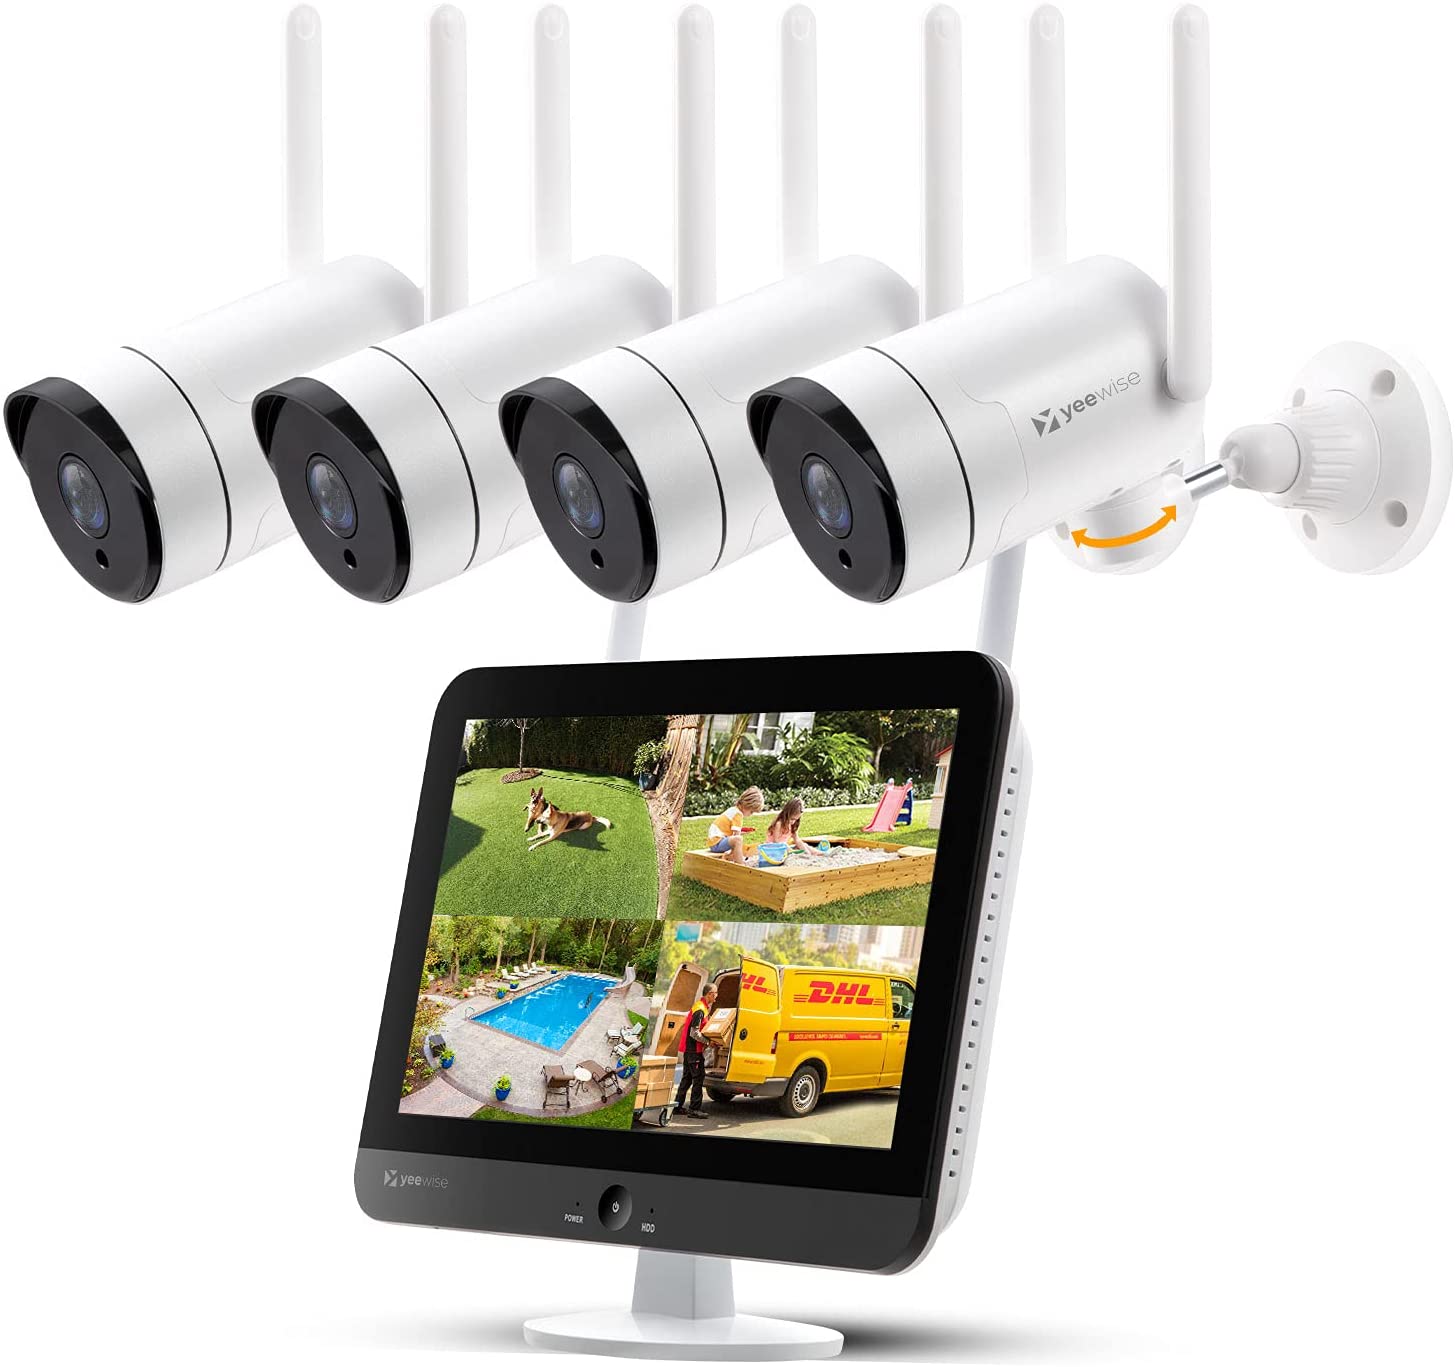 Save Up to 49 Percent on a Yi Home Security Camera